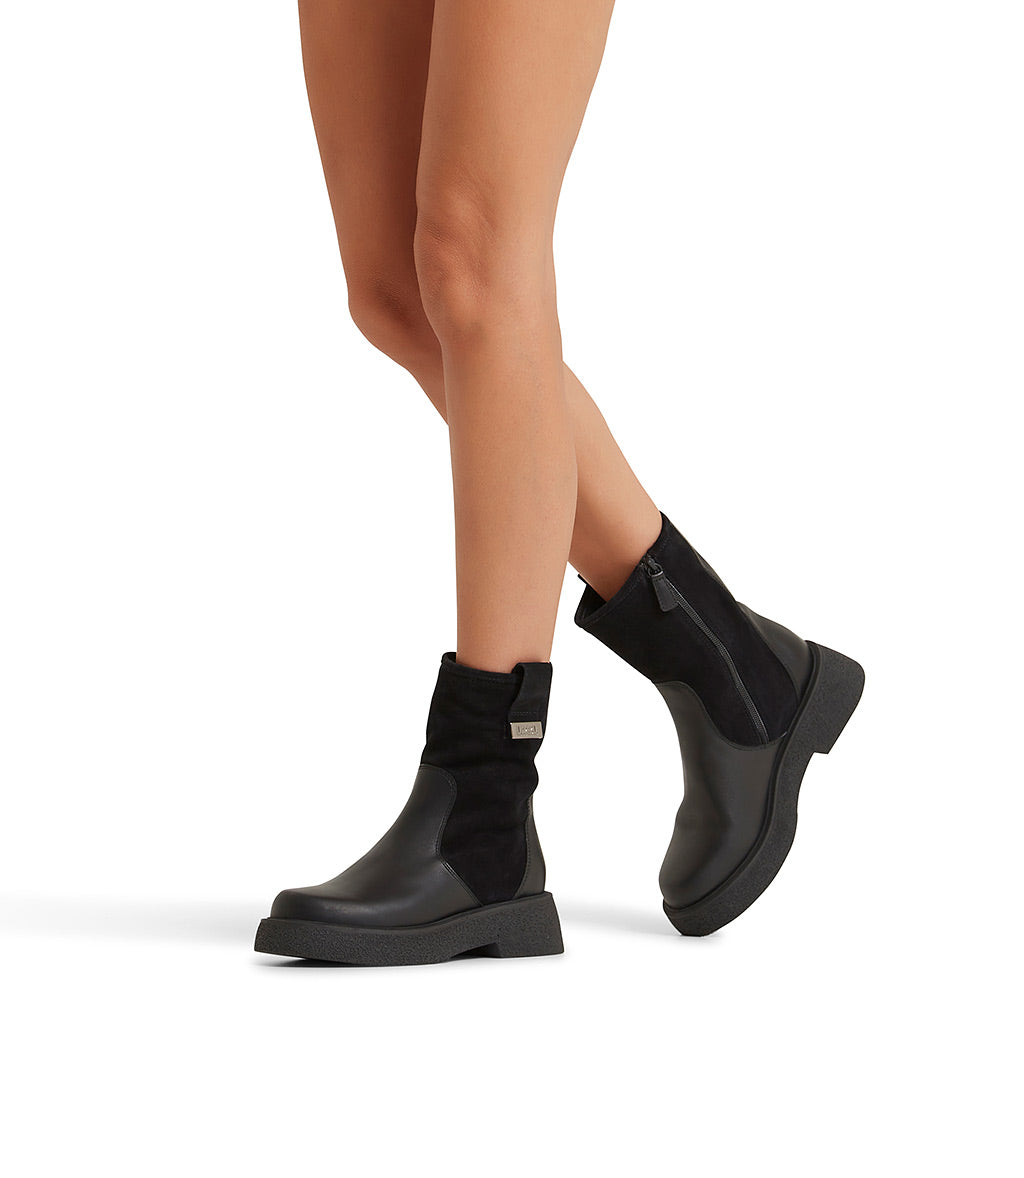 Black leather and suede ankle boots